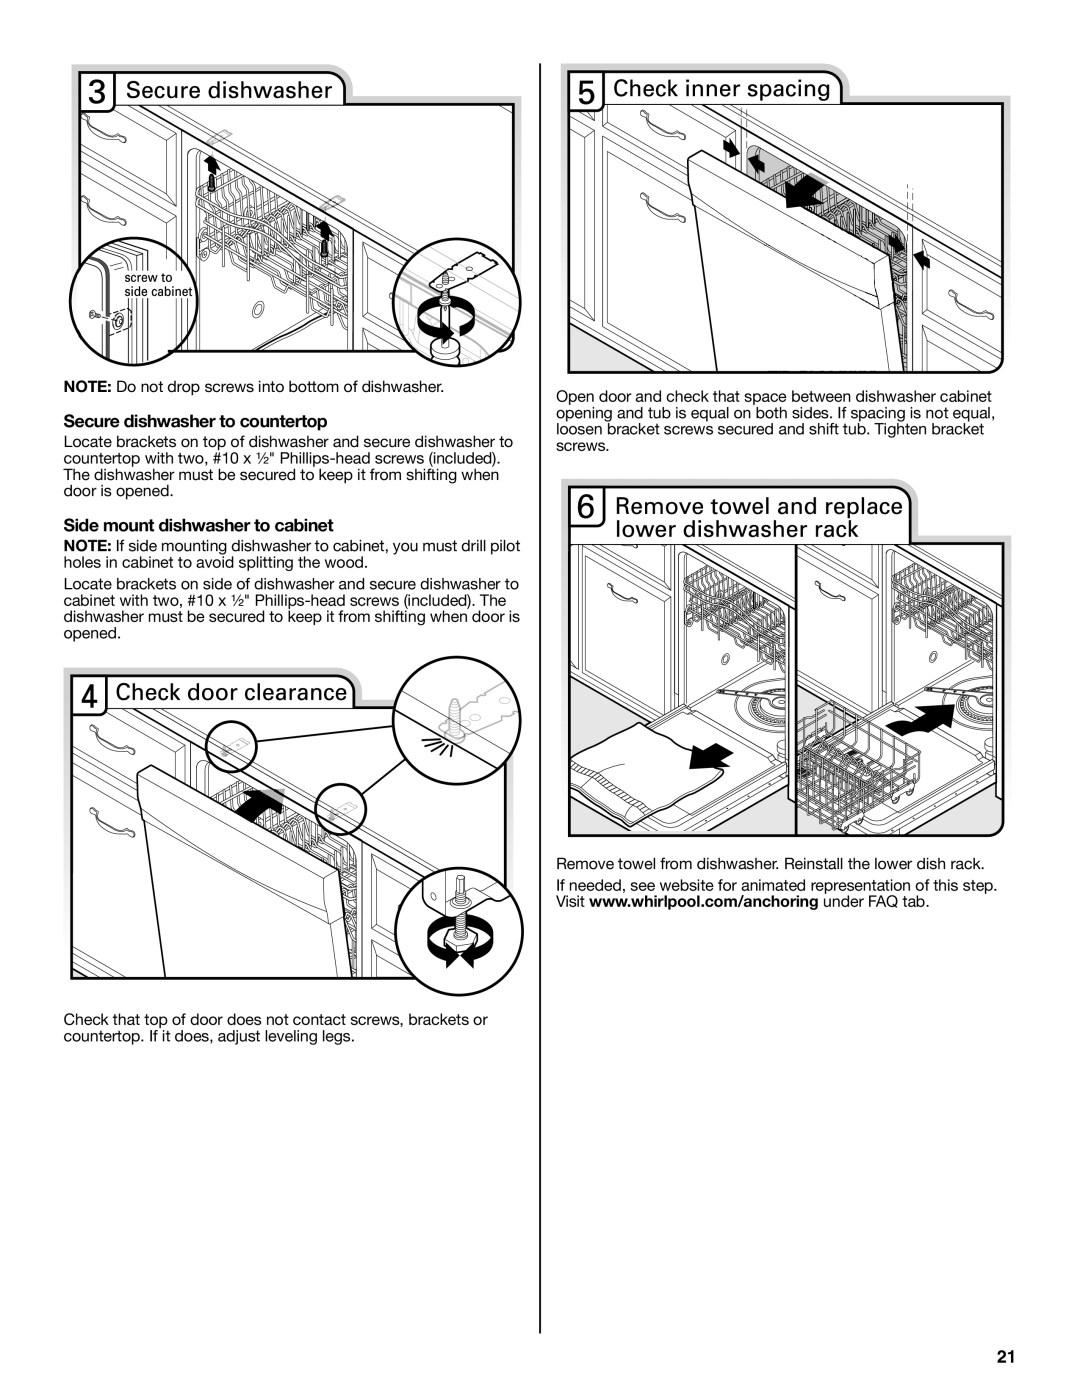 Whirlpool W10435039A installation instructions Secure dishwasher to countertop, Side mount dishwasher to cabinet 